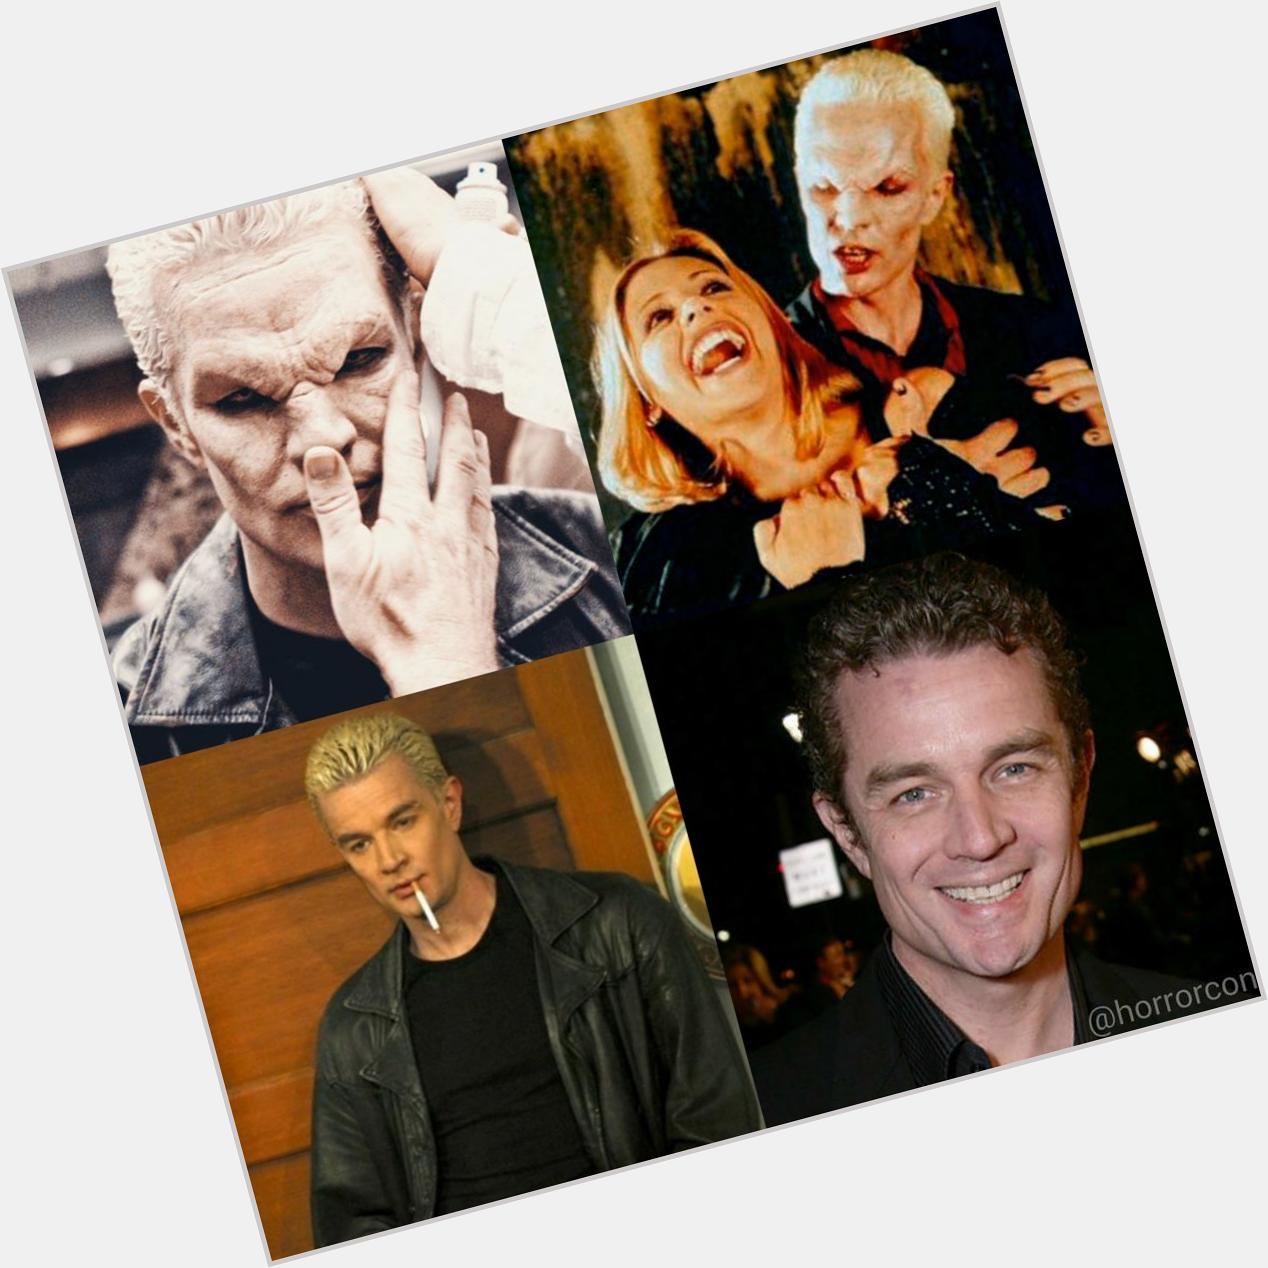 Happy Birthday to James Marsters! Star of Buffy and Angel, celebrates his 53rd birthday today.  